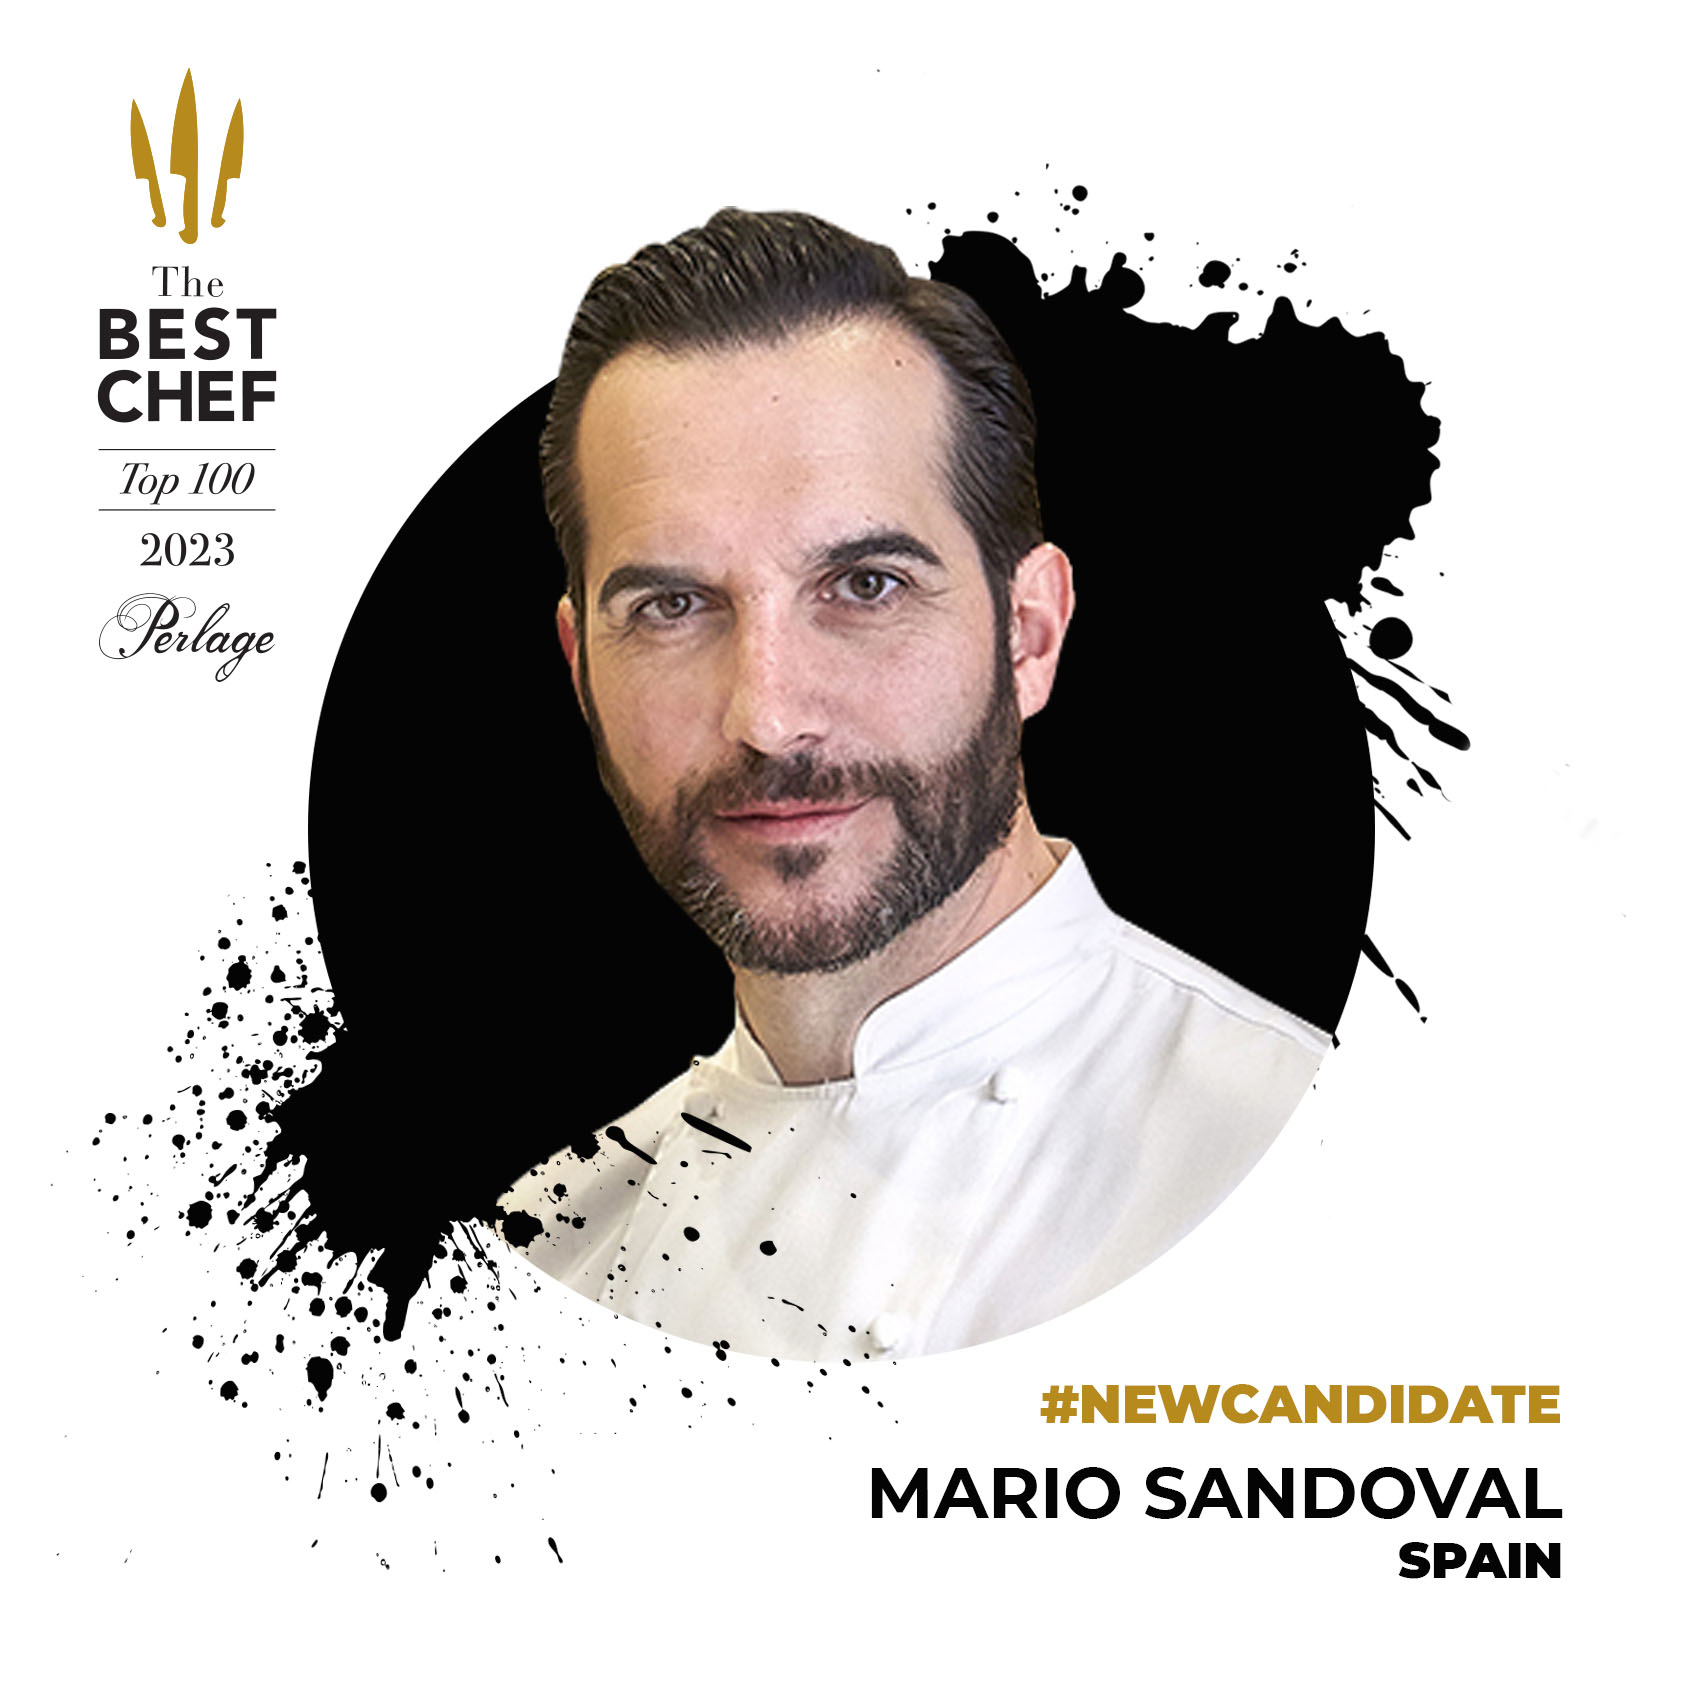 forum leje symmetri Top100 The Best Chef 2023 - candidates - The Best Chef Awards